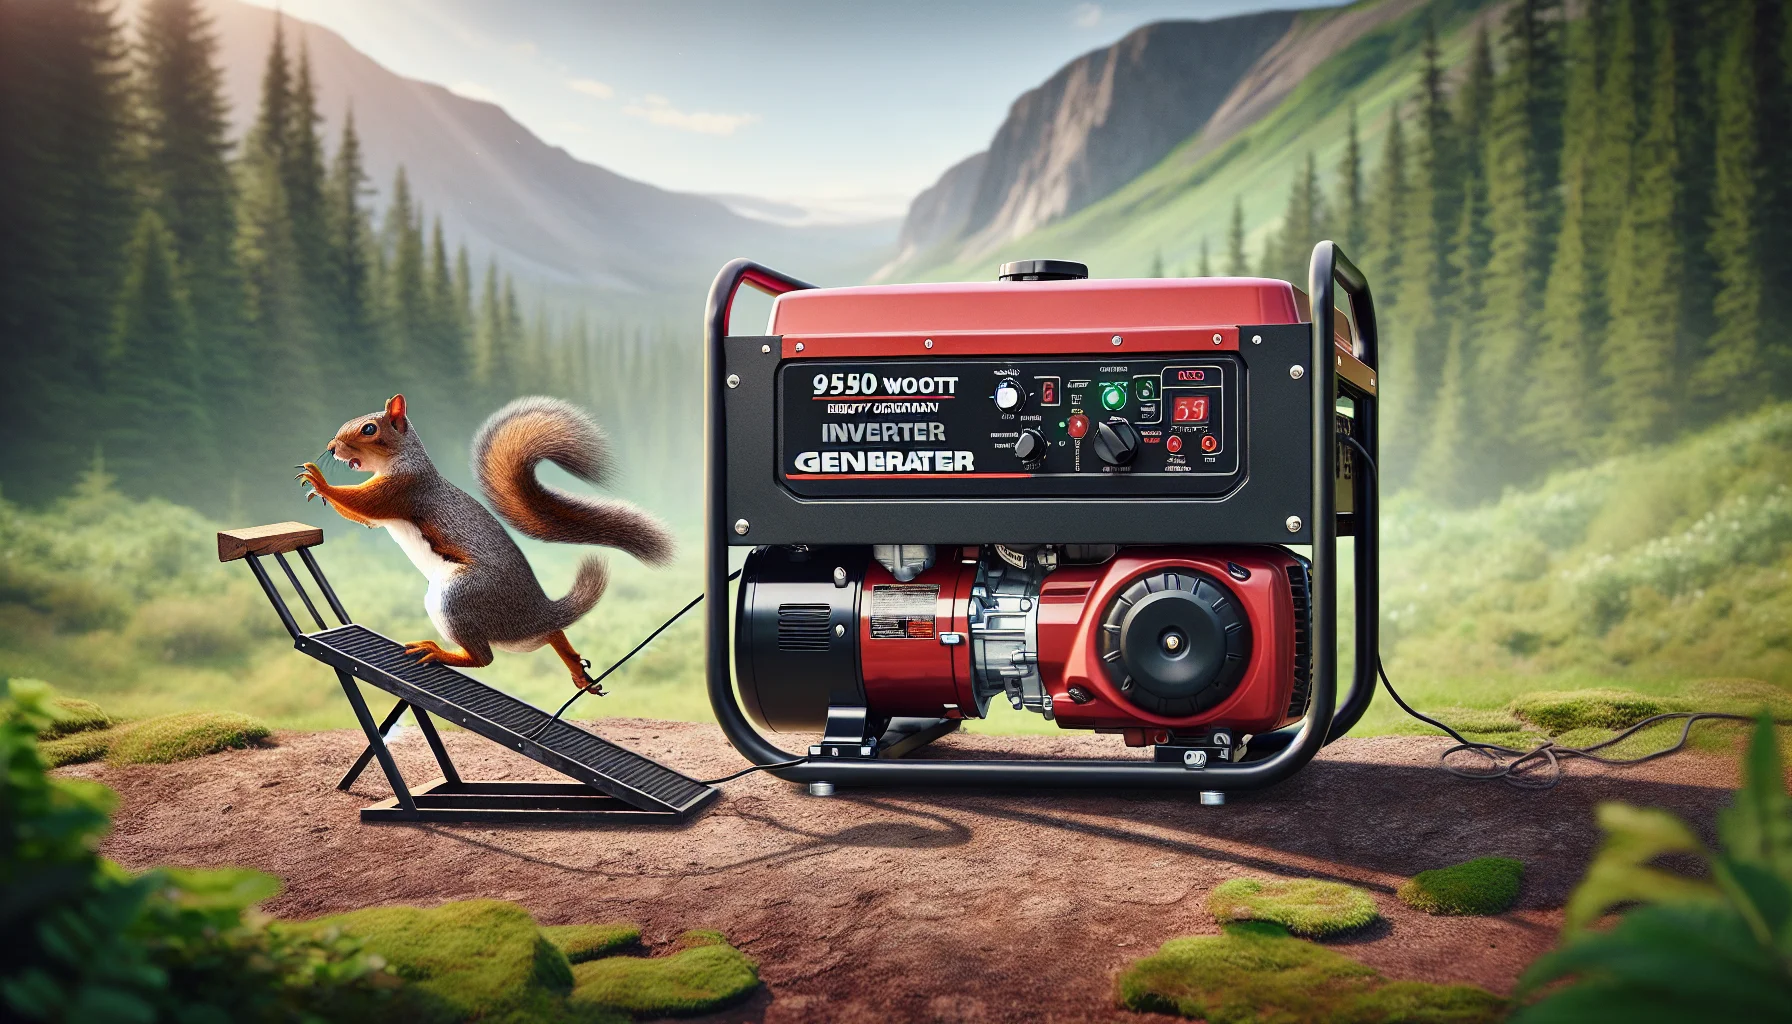 Create a detailed, realistic image showcasing a heavy-duty, 9500 watt inverter generator with a red-black color scheme in a humorous scenario. The generator is sitting in the middle of a natural landscape, perhaps a forest or a mountainside. Beside the generator, a cartoon squirrel humorously attempts to run on a makeshift treadmill, futilely trying to generate electricity. The image should be enticing and comedic, portraying the convenience and power of having such a generator compared to alternative means of generating electricity, like the squirrel's endeavors.